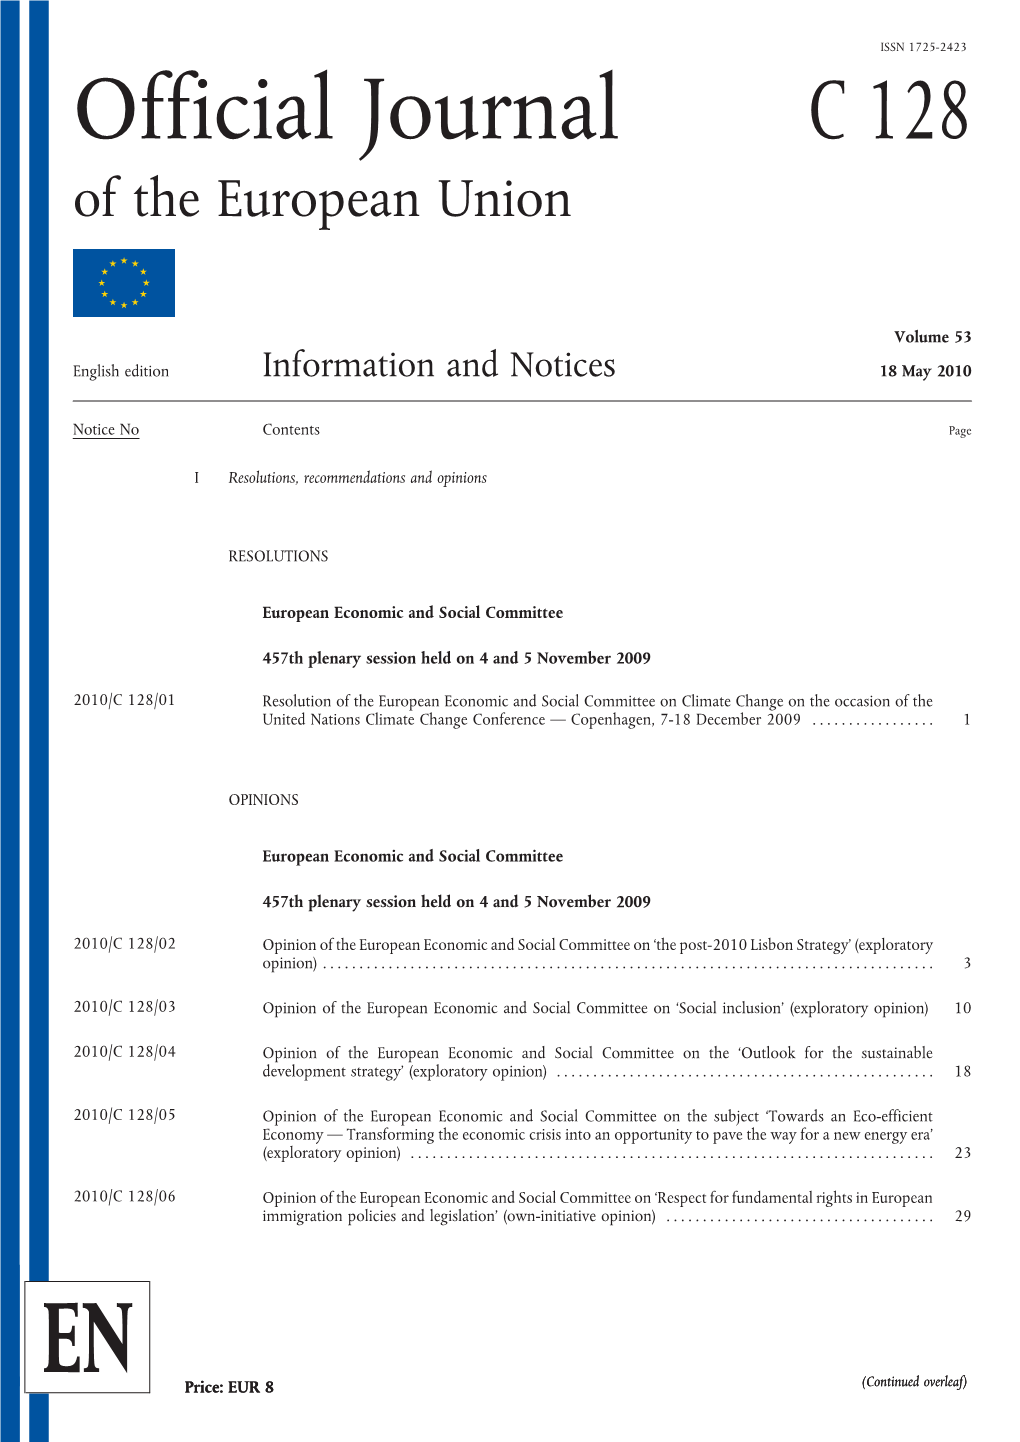 Official Journal C 128 of the European Union